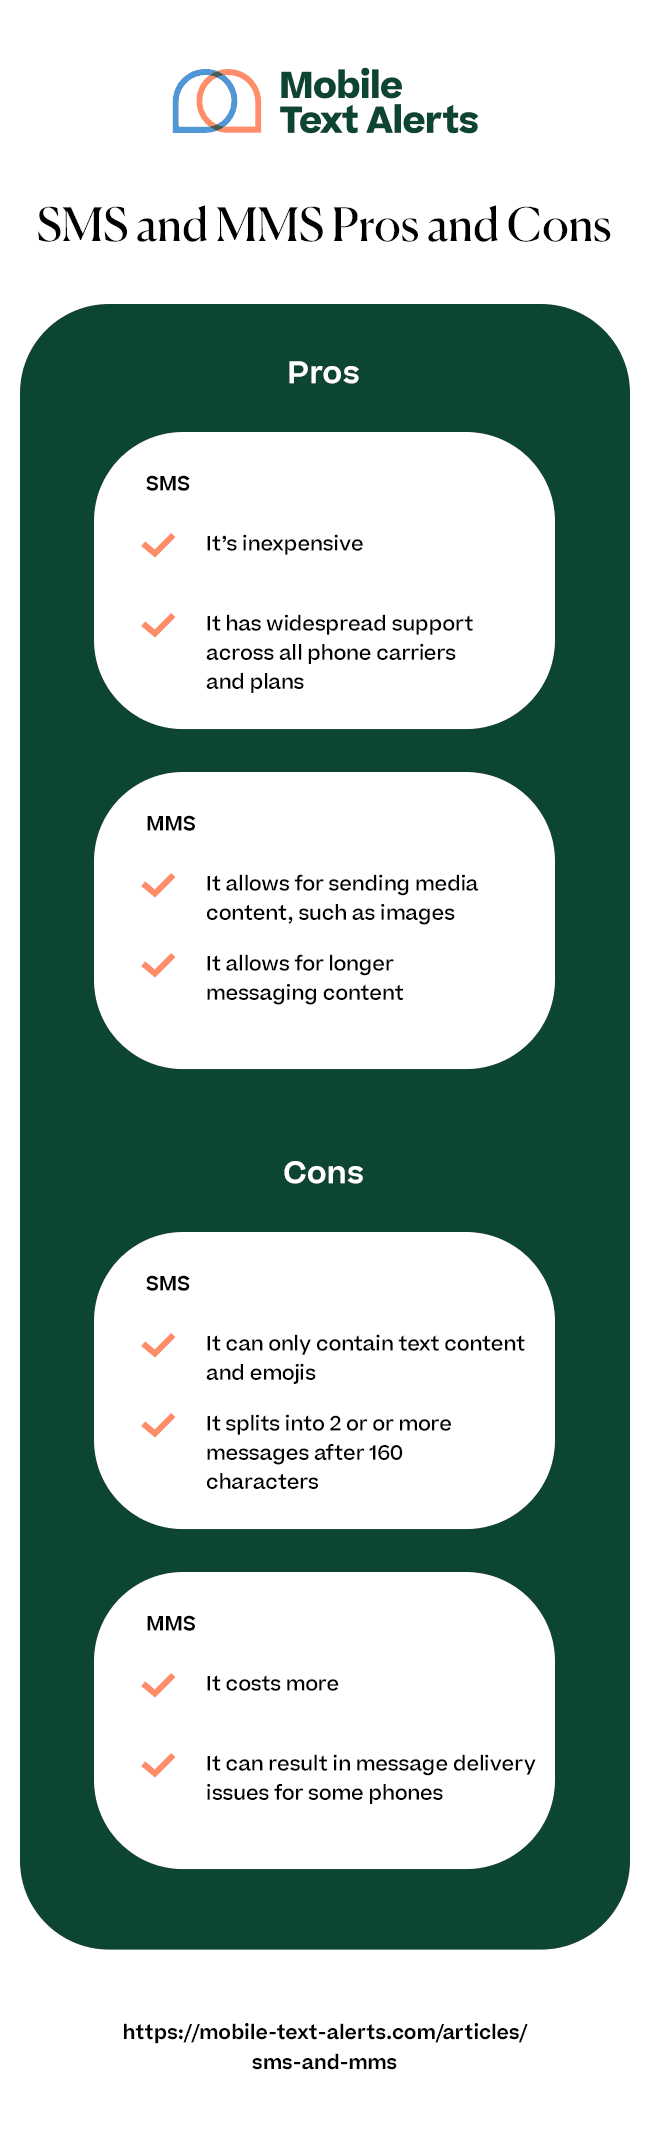 SMS and MMS pros and cons